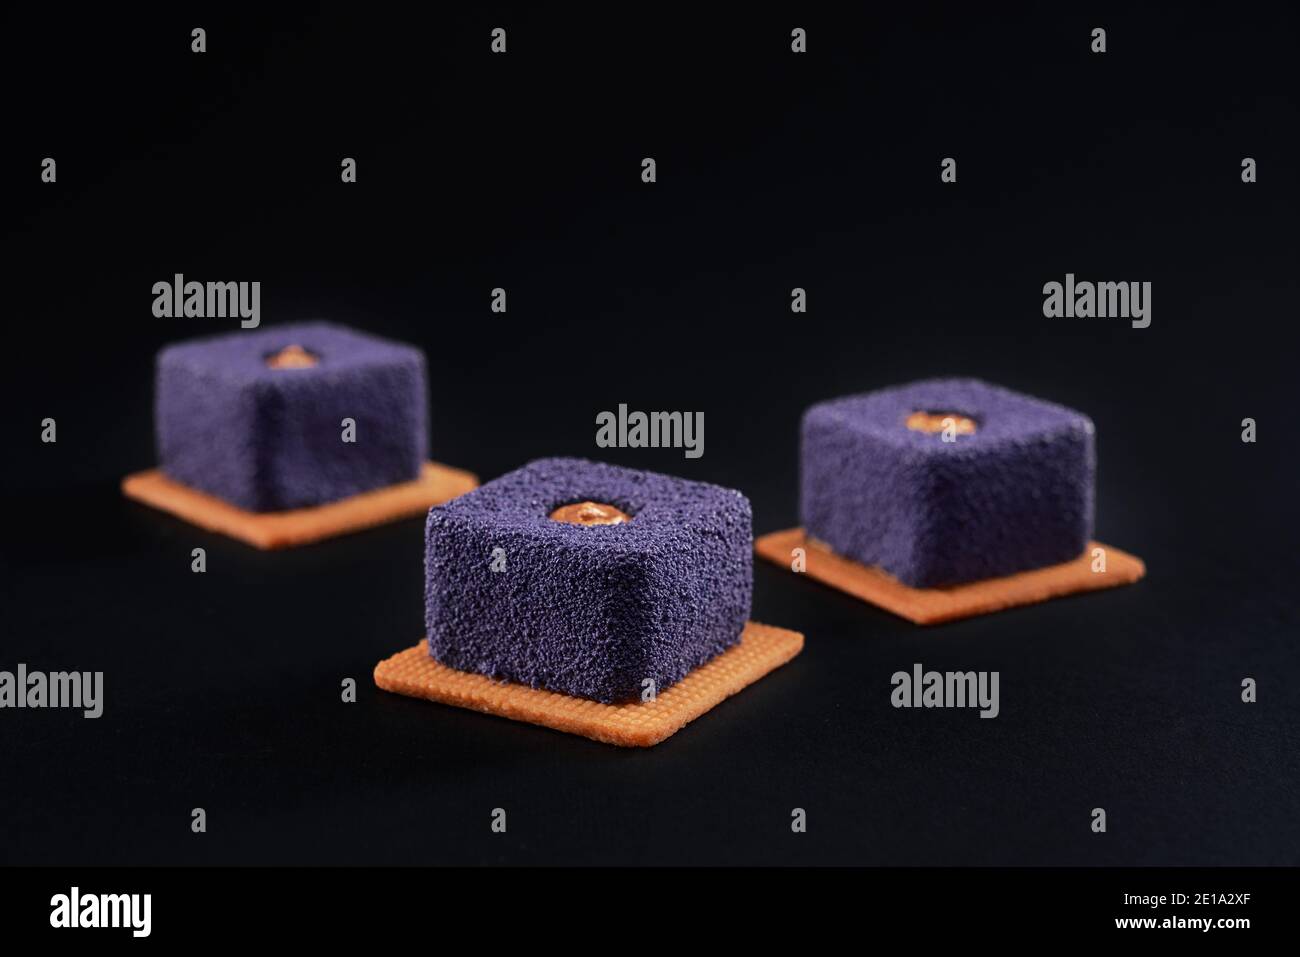 Closeup view of matte purple pie pieces filled with brown creme isolated on black studio background. Three small square matte cakes in row on cookies in restaurant. Sweet bakey, desserts concept. Stock Photo